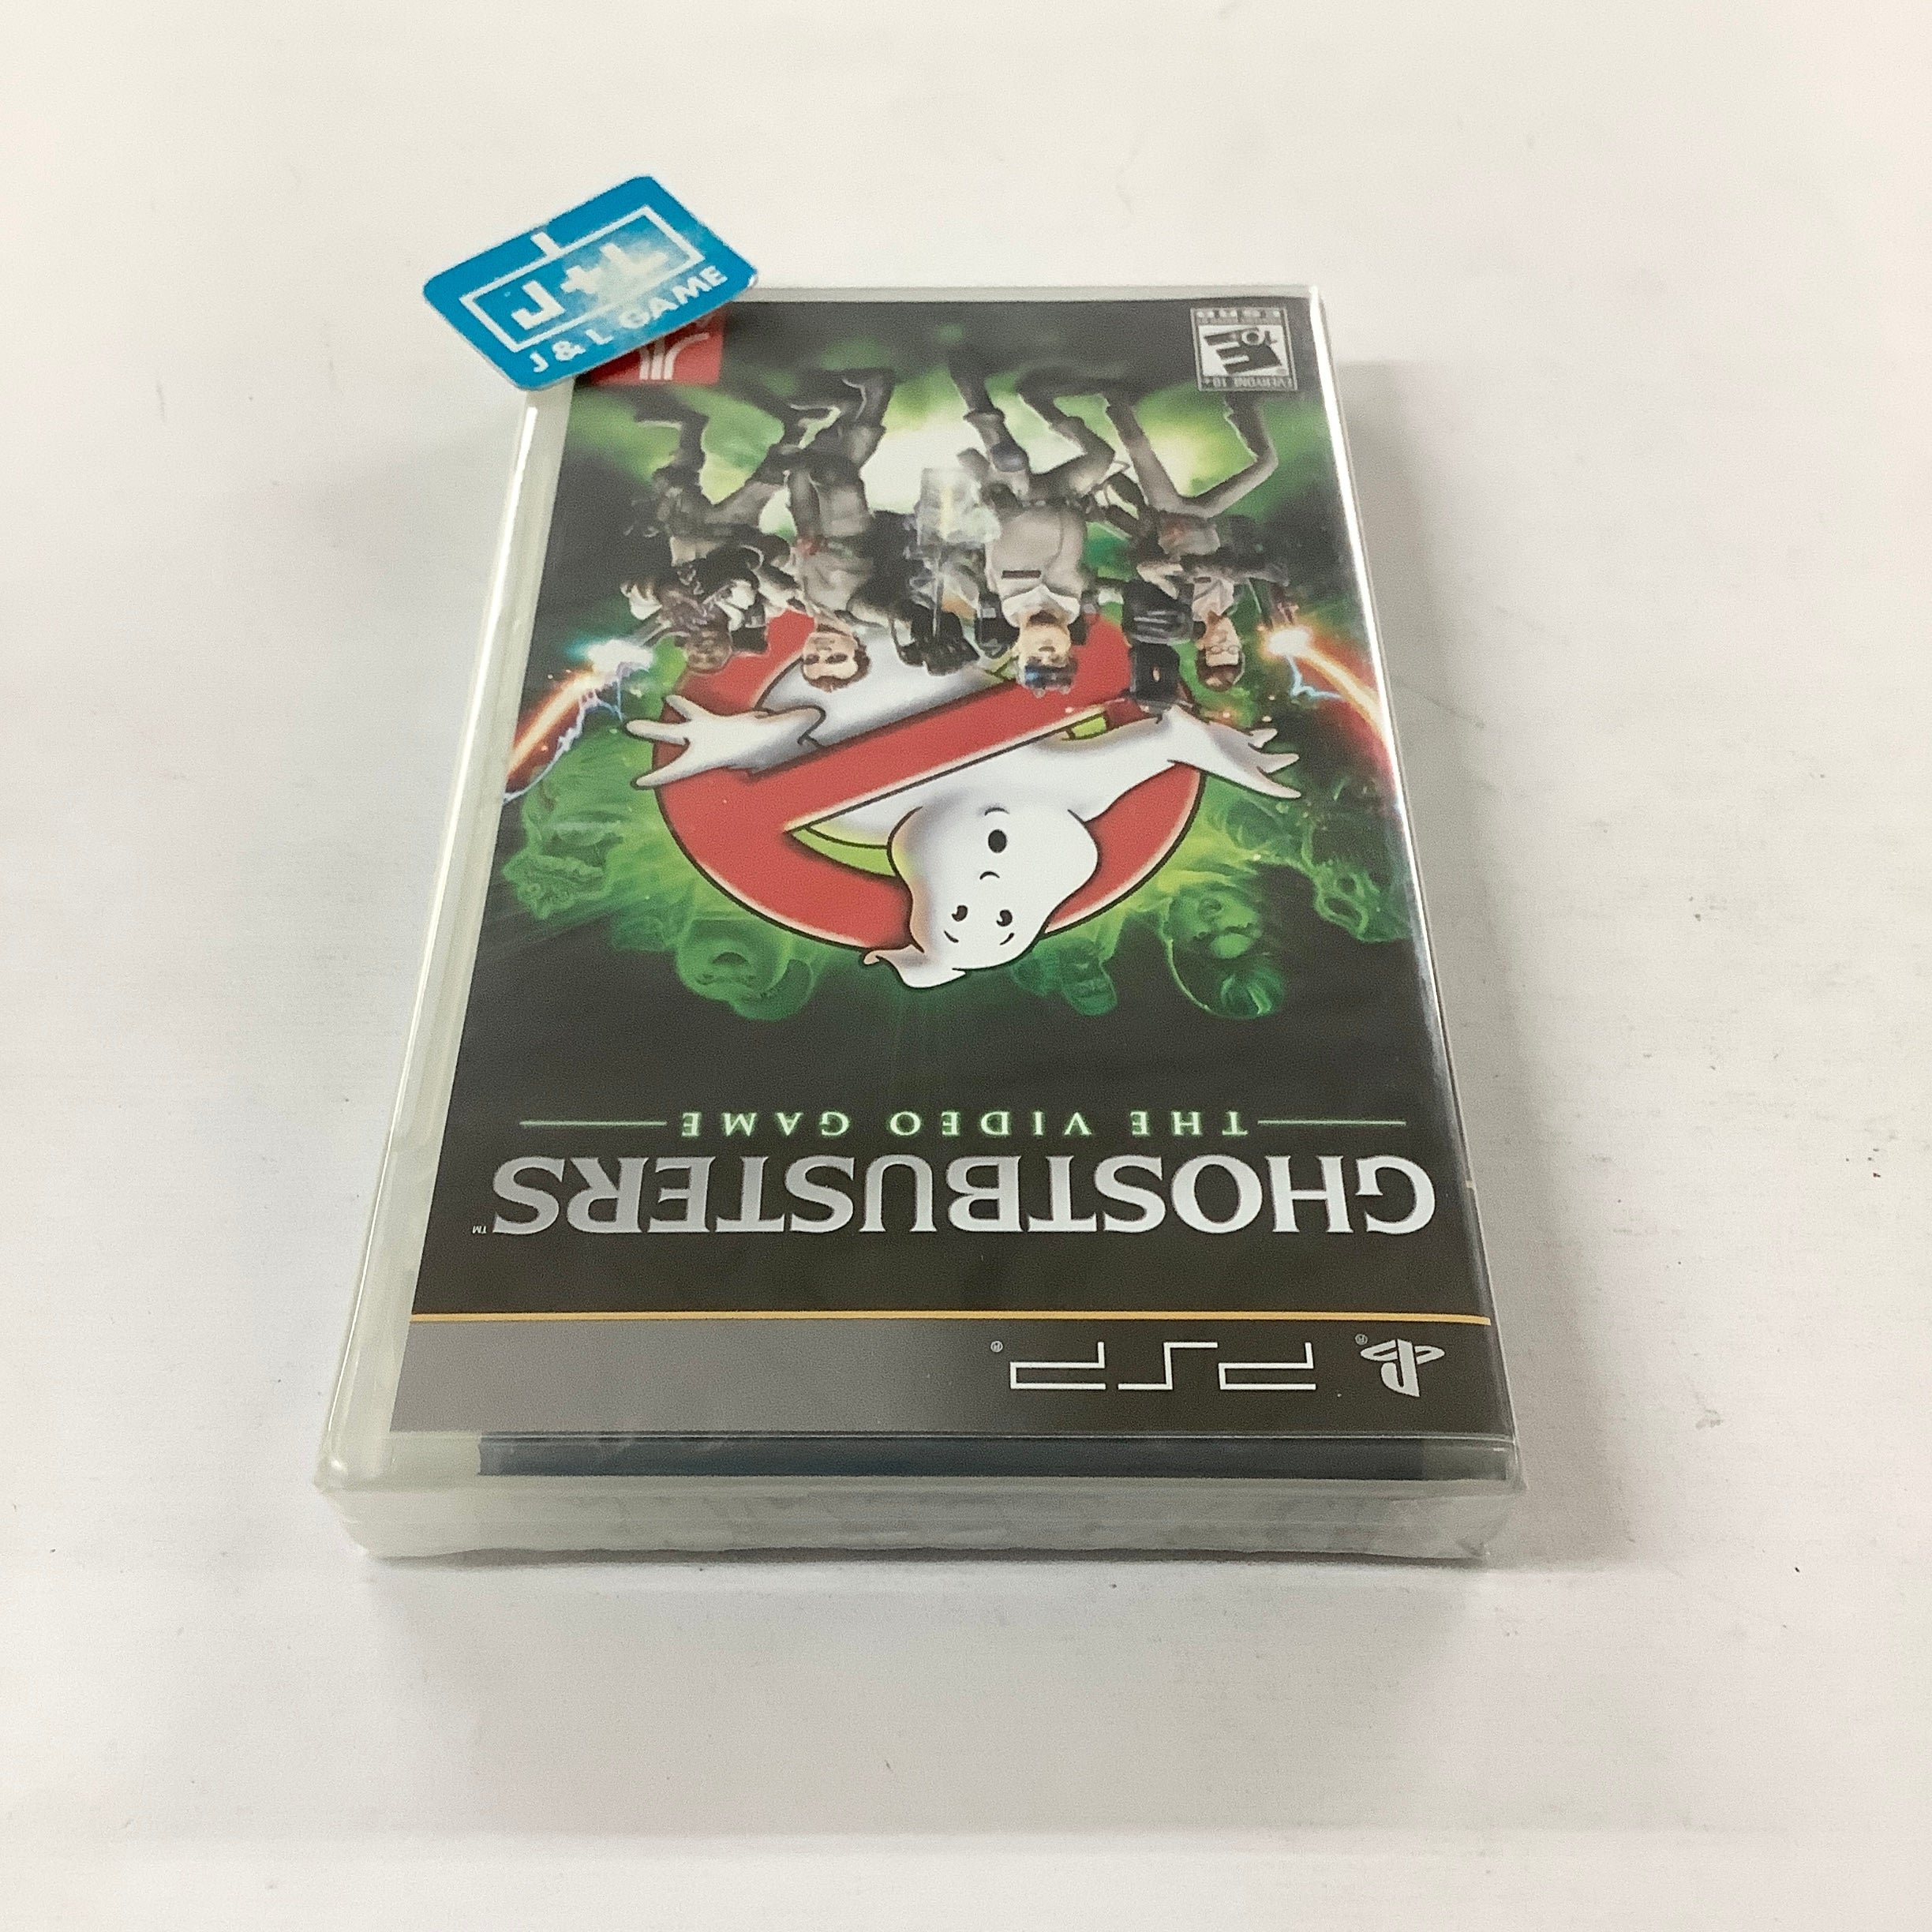 Ghostbusters: The Video Game - Sony PSP Video Games Atari SA   